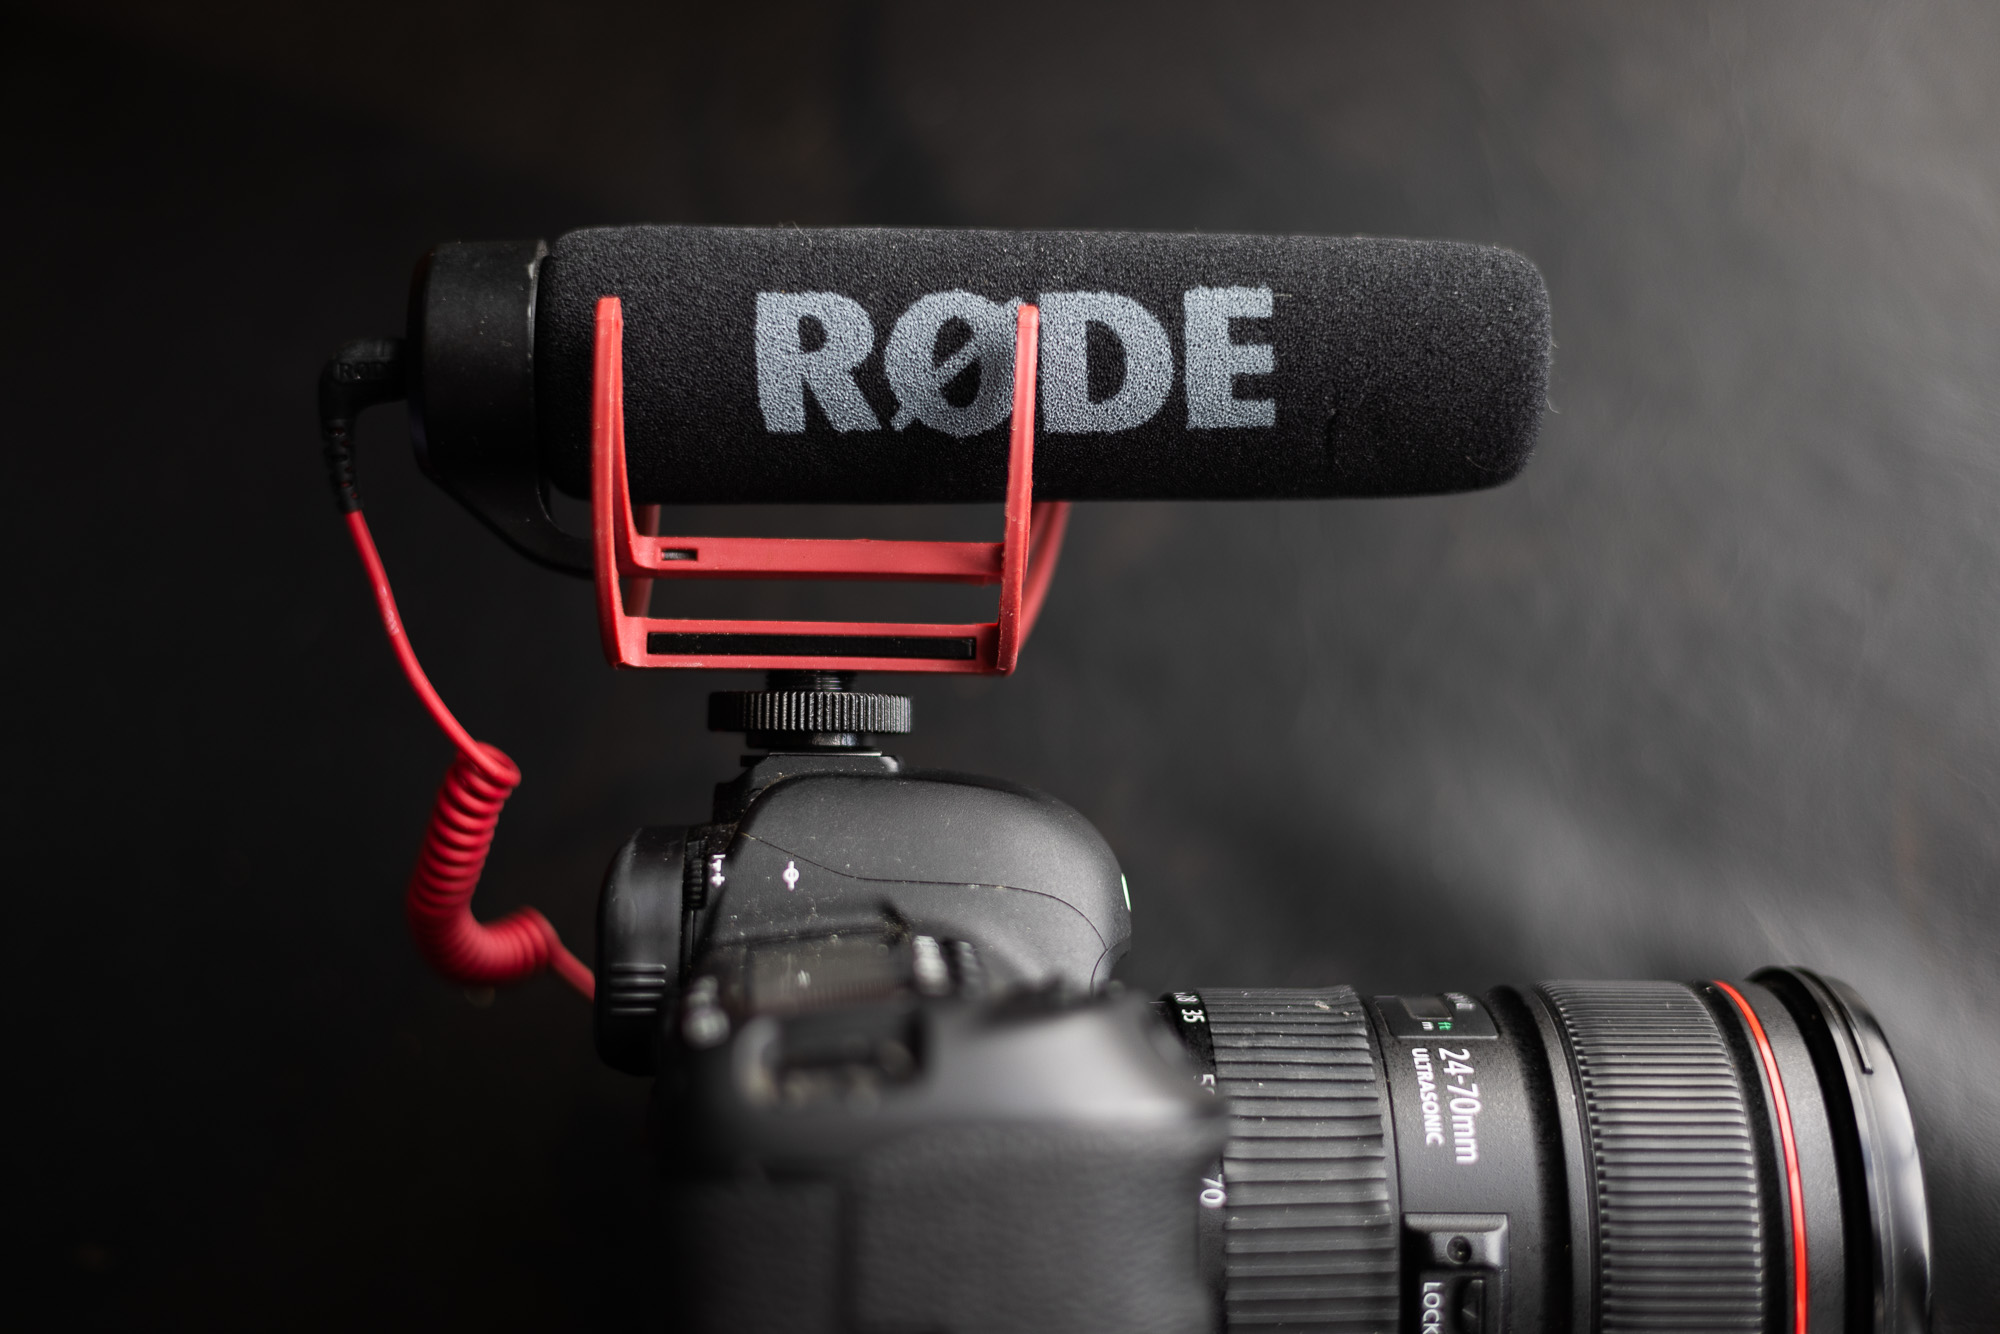 The RØDE Wireless PRO is a more powerful wireless microphone